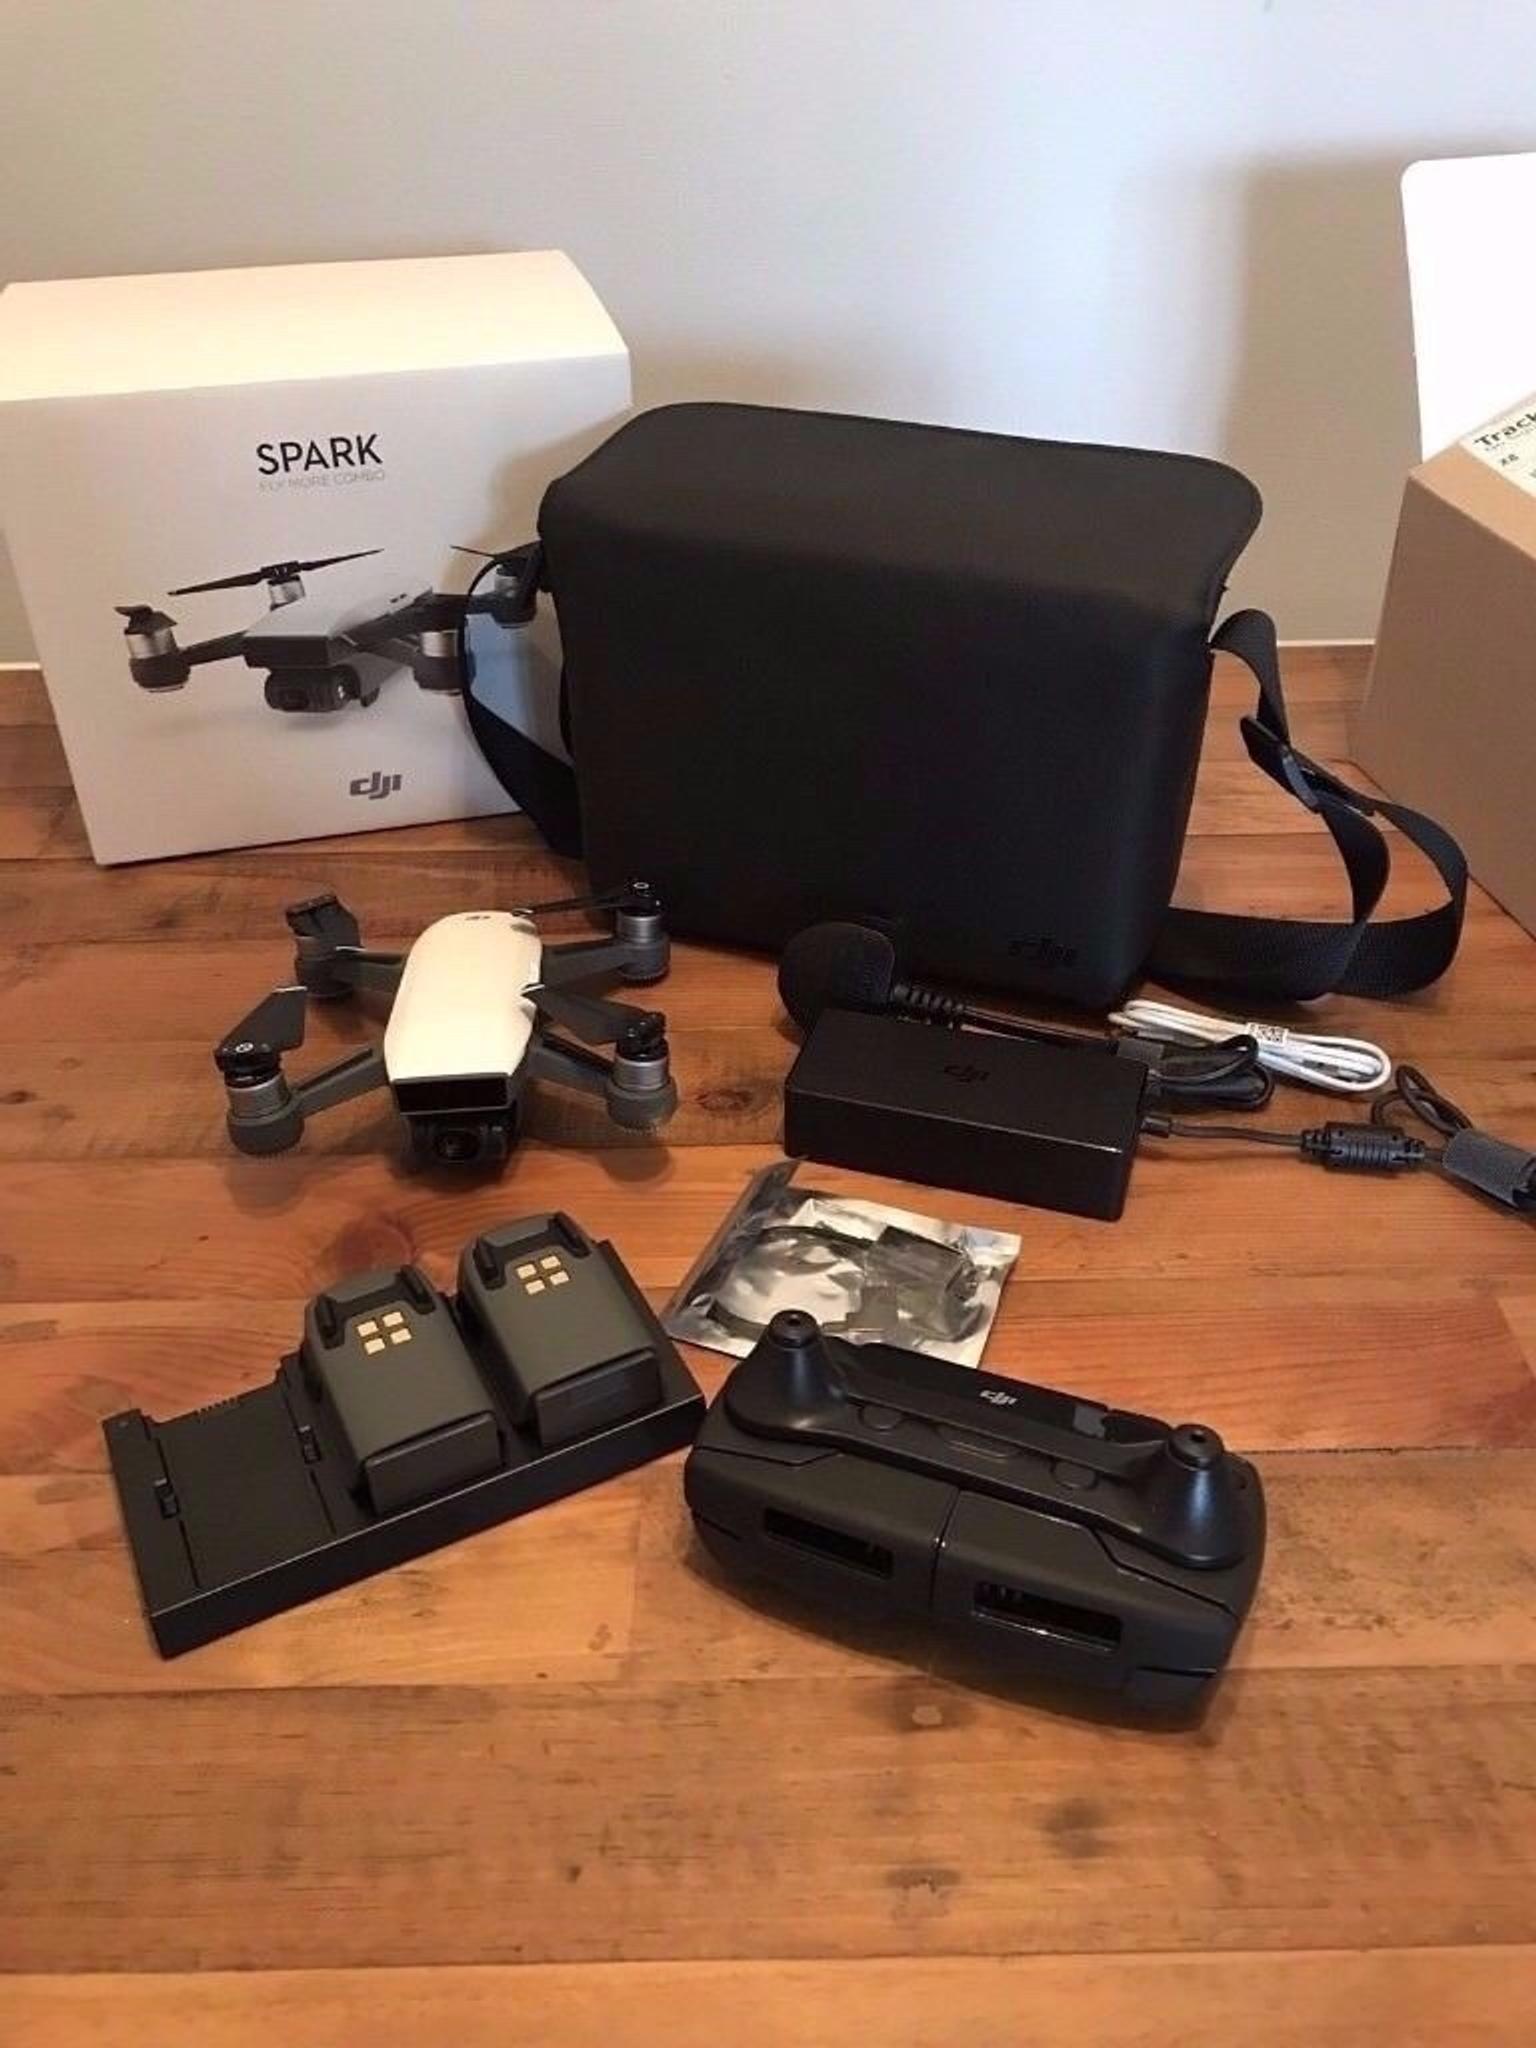 dji spark fly more combo currys